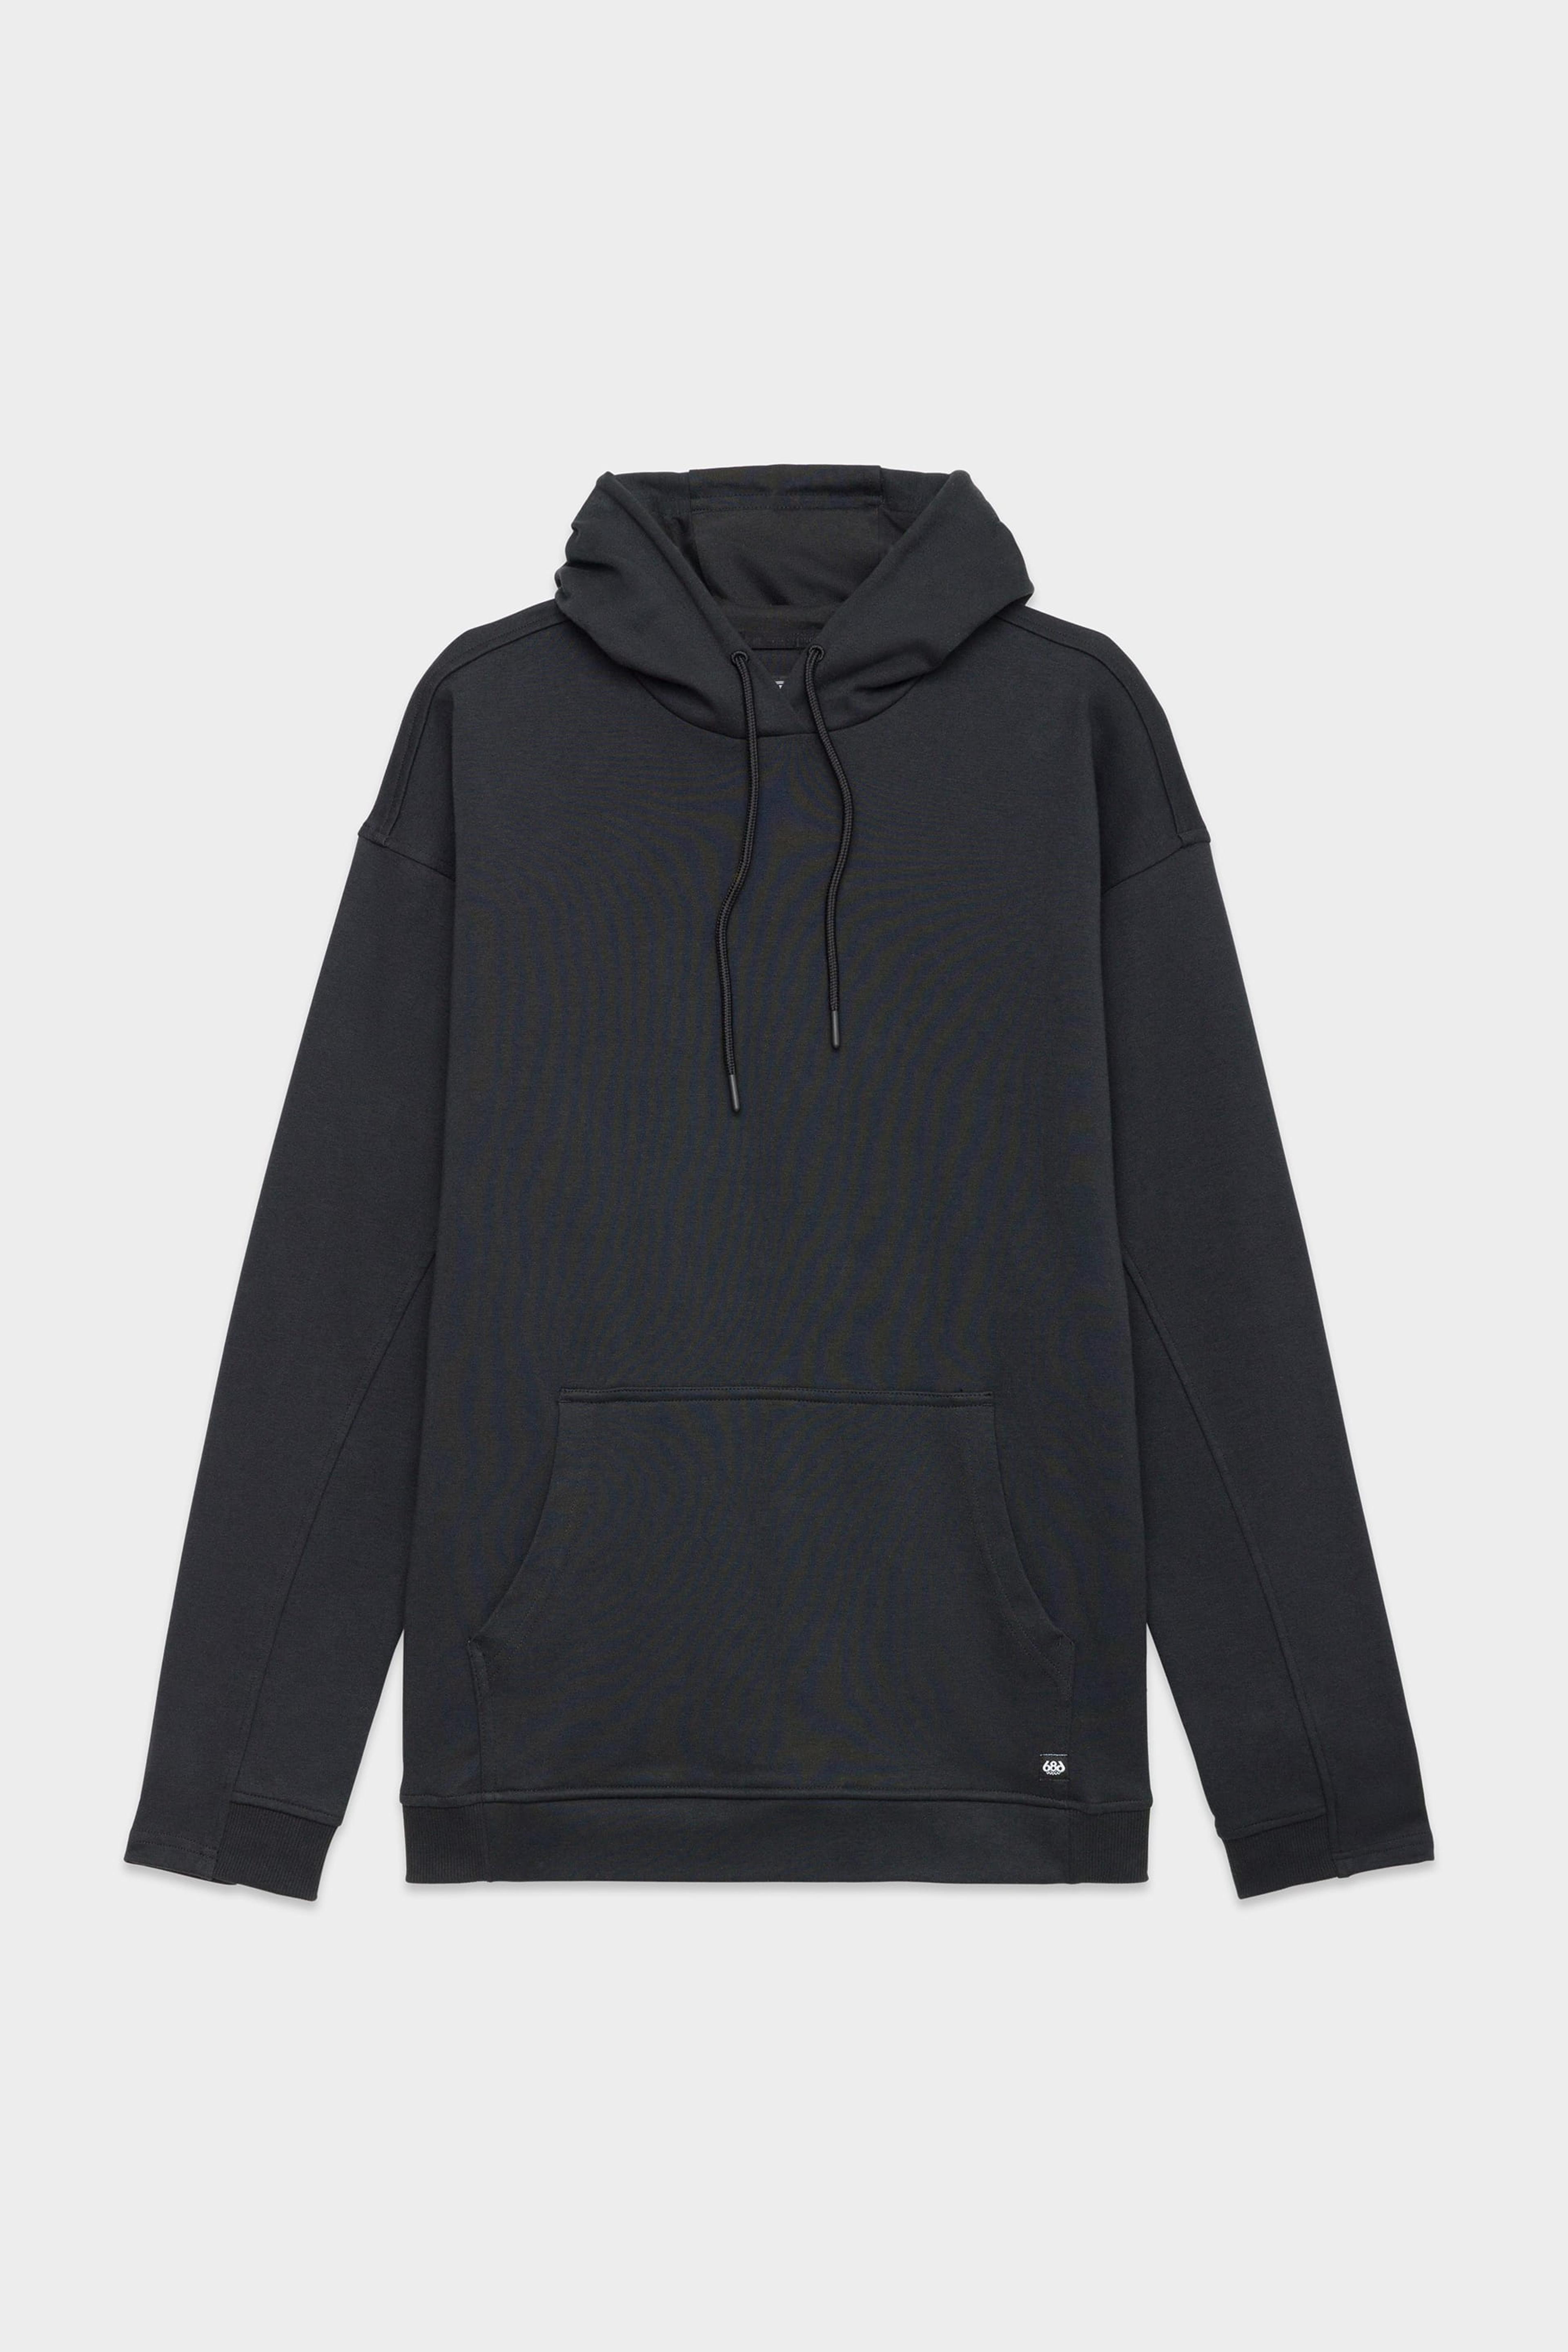 686 Men's Everywhere Performance Double Knit Hoody